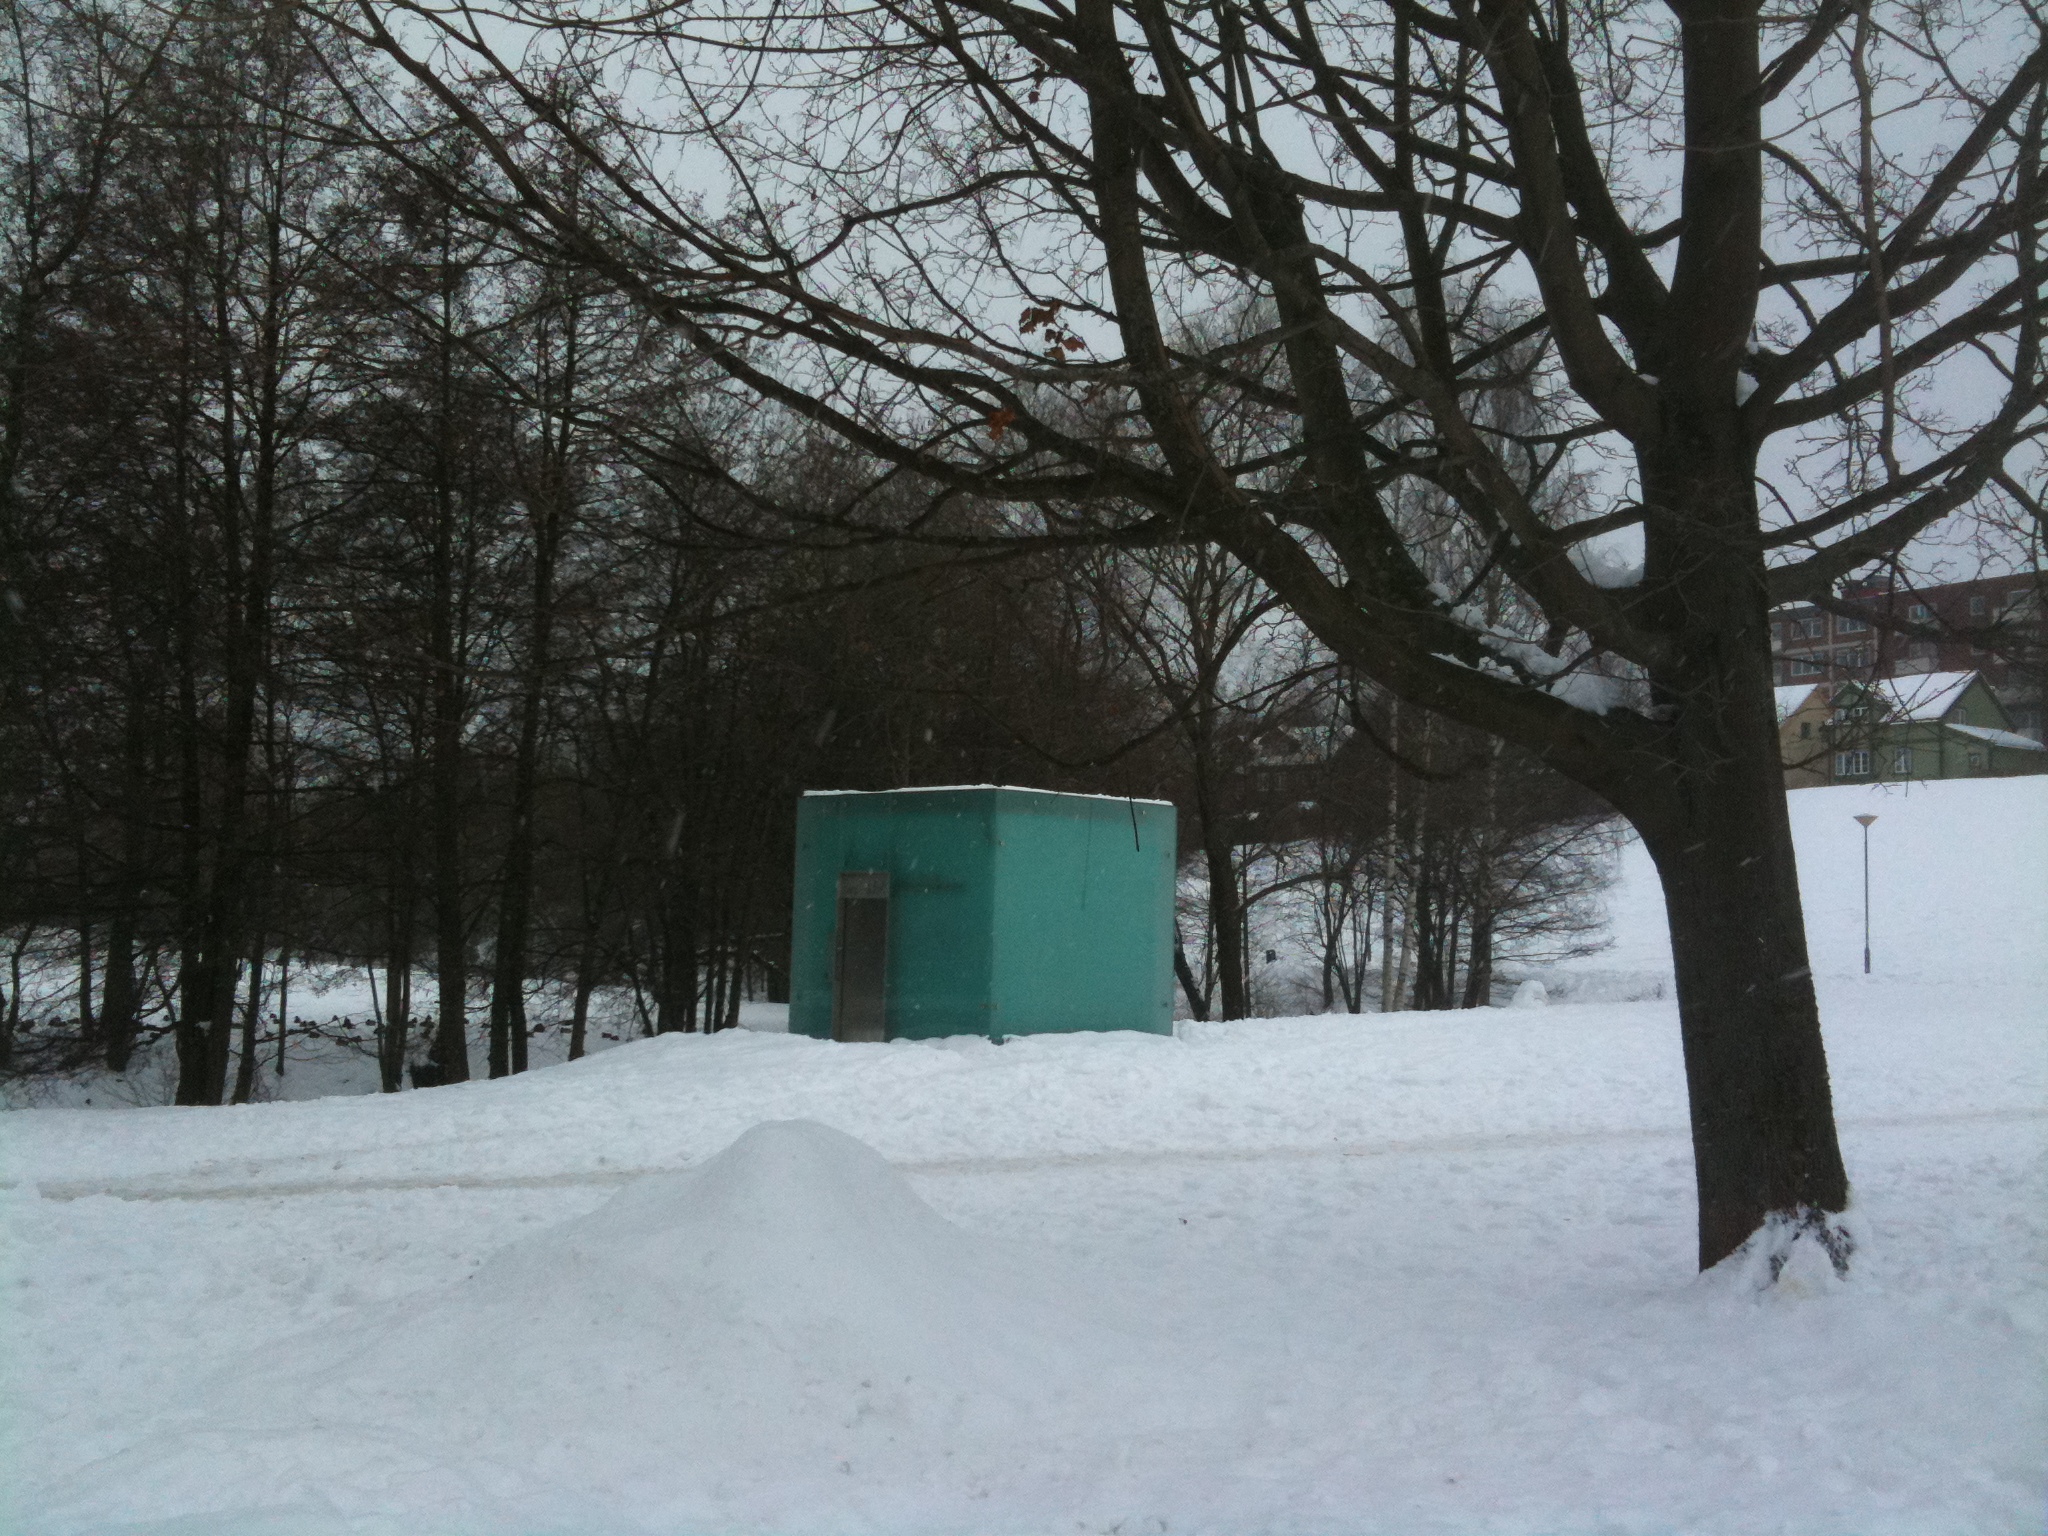 a small blue building sits in the snow near a large tree